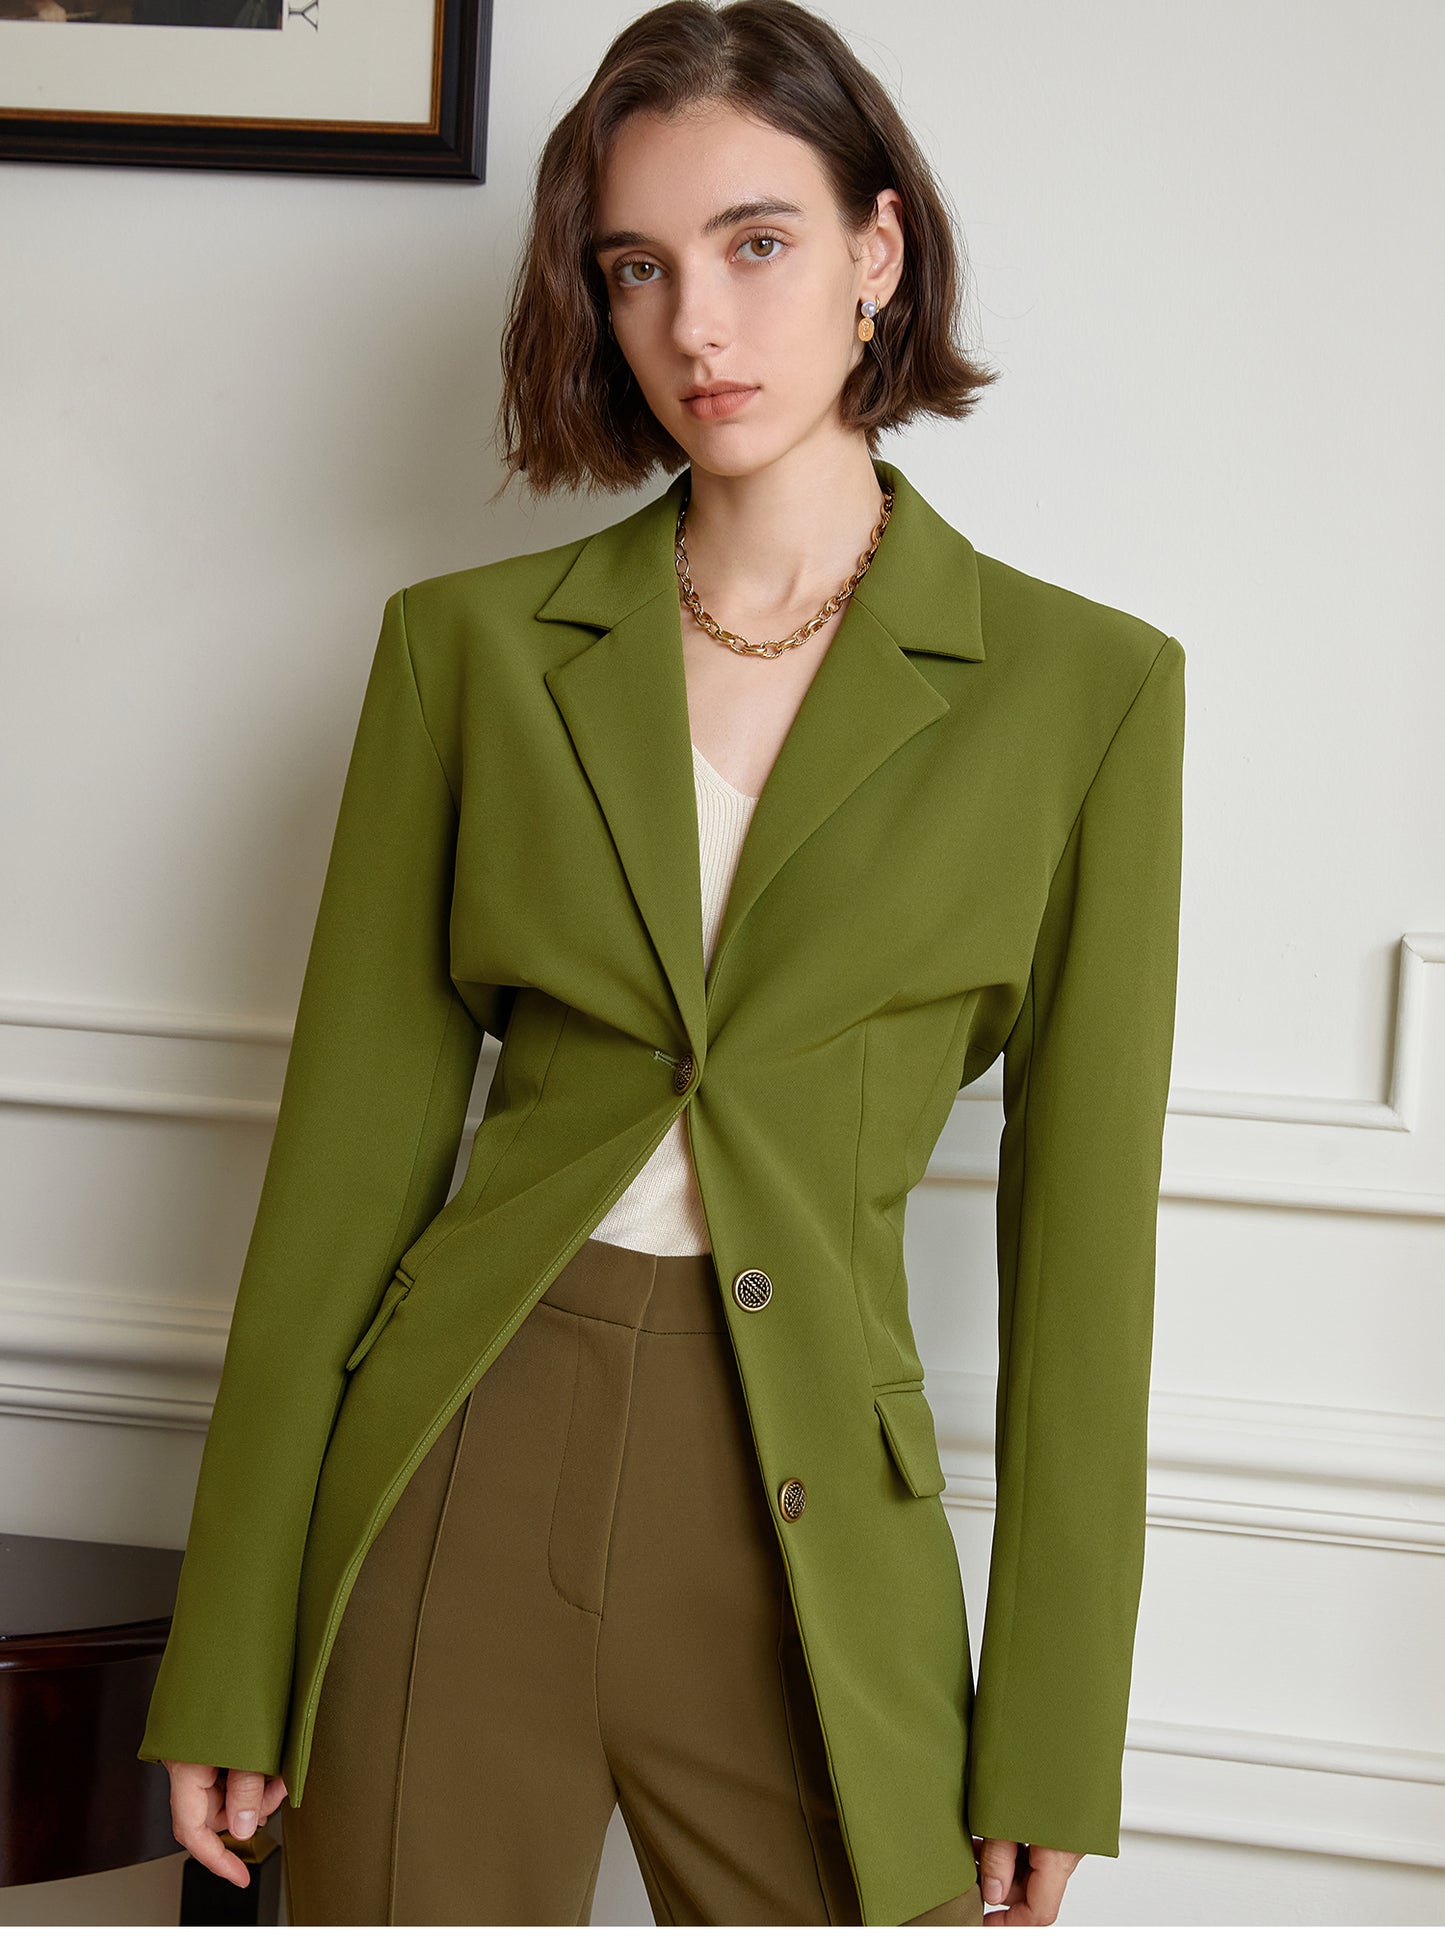 Stylish one-button placket, finished in a classic retro green long sleeve jacket- Elasta